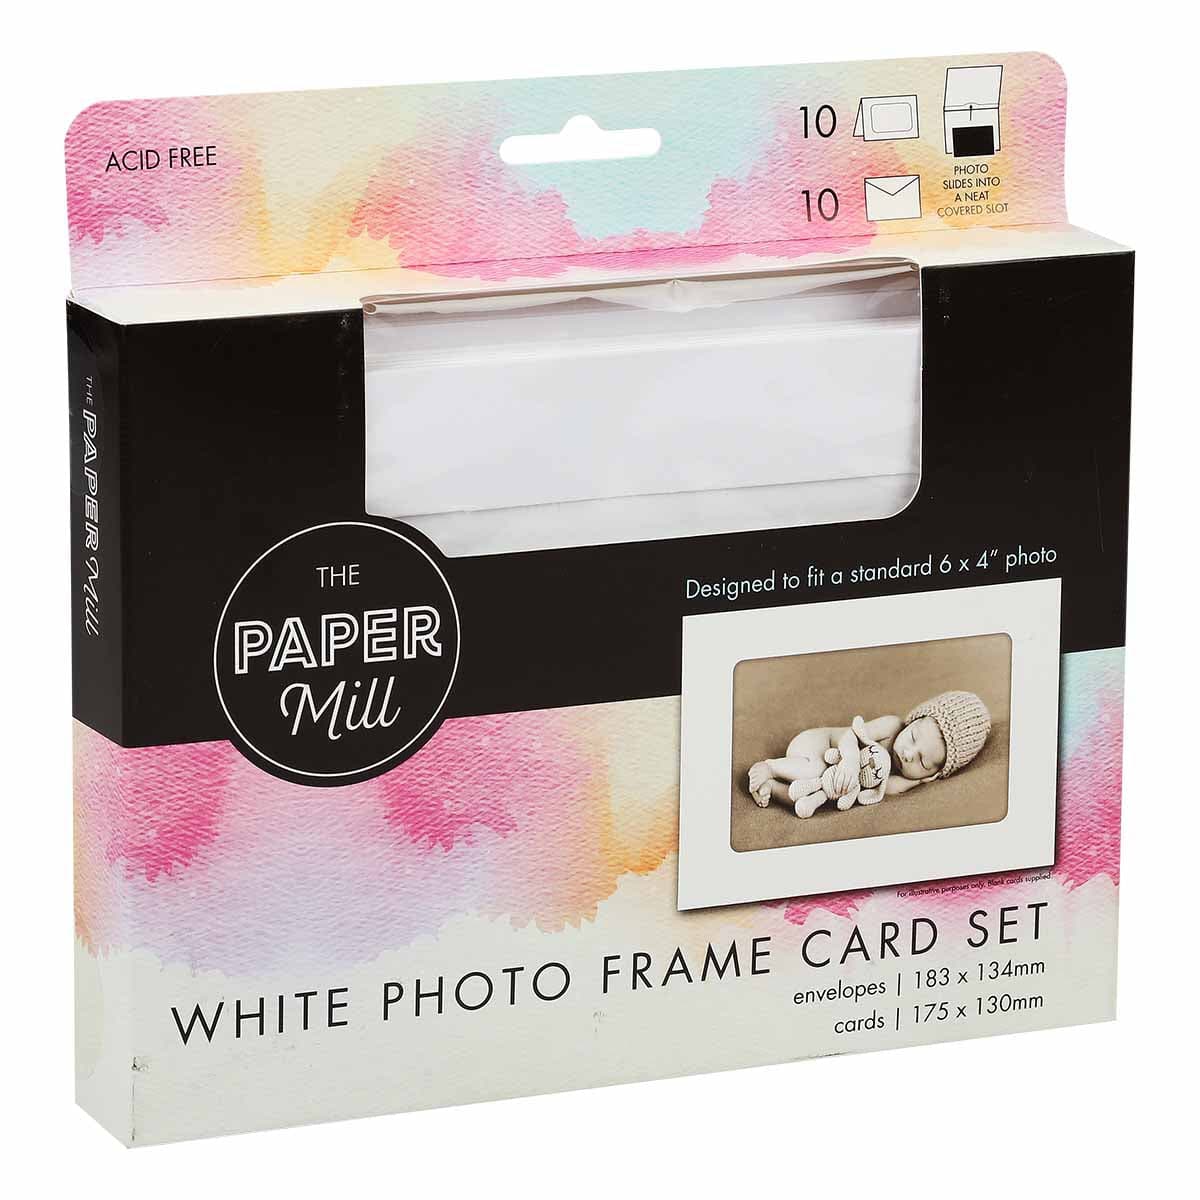 Image of The Paper Mill Photo Frame Card with Envelope White 10 Pack